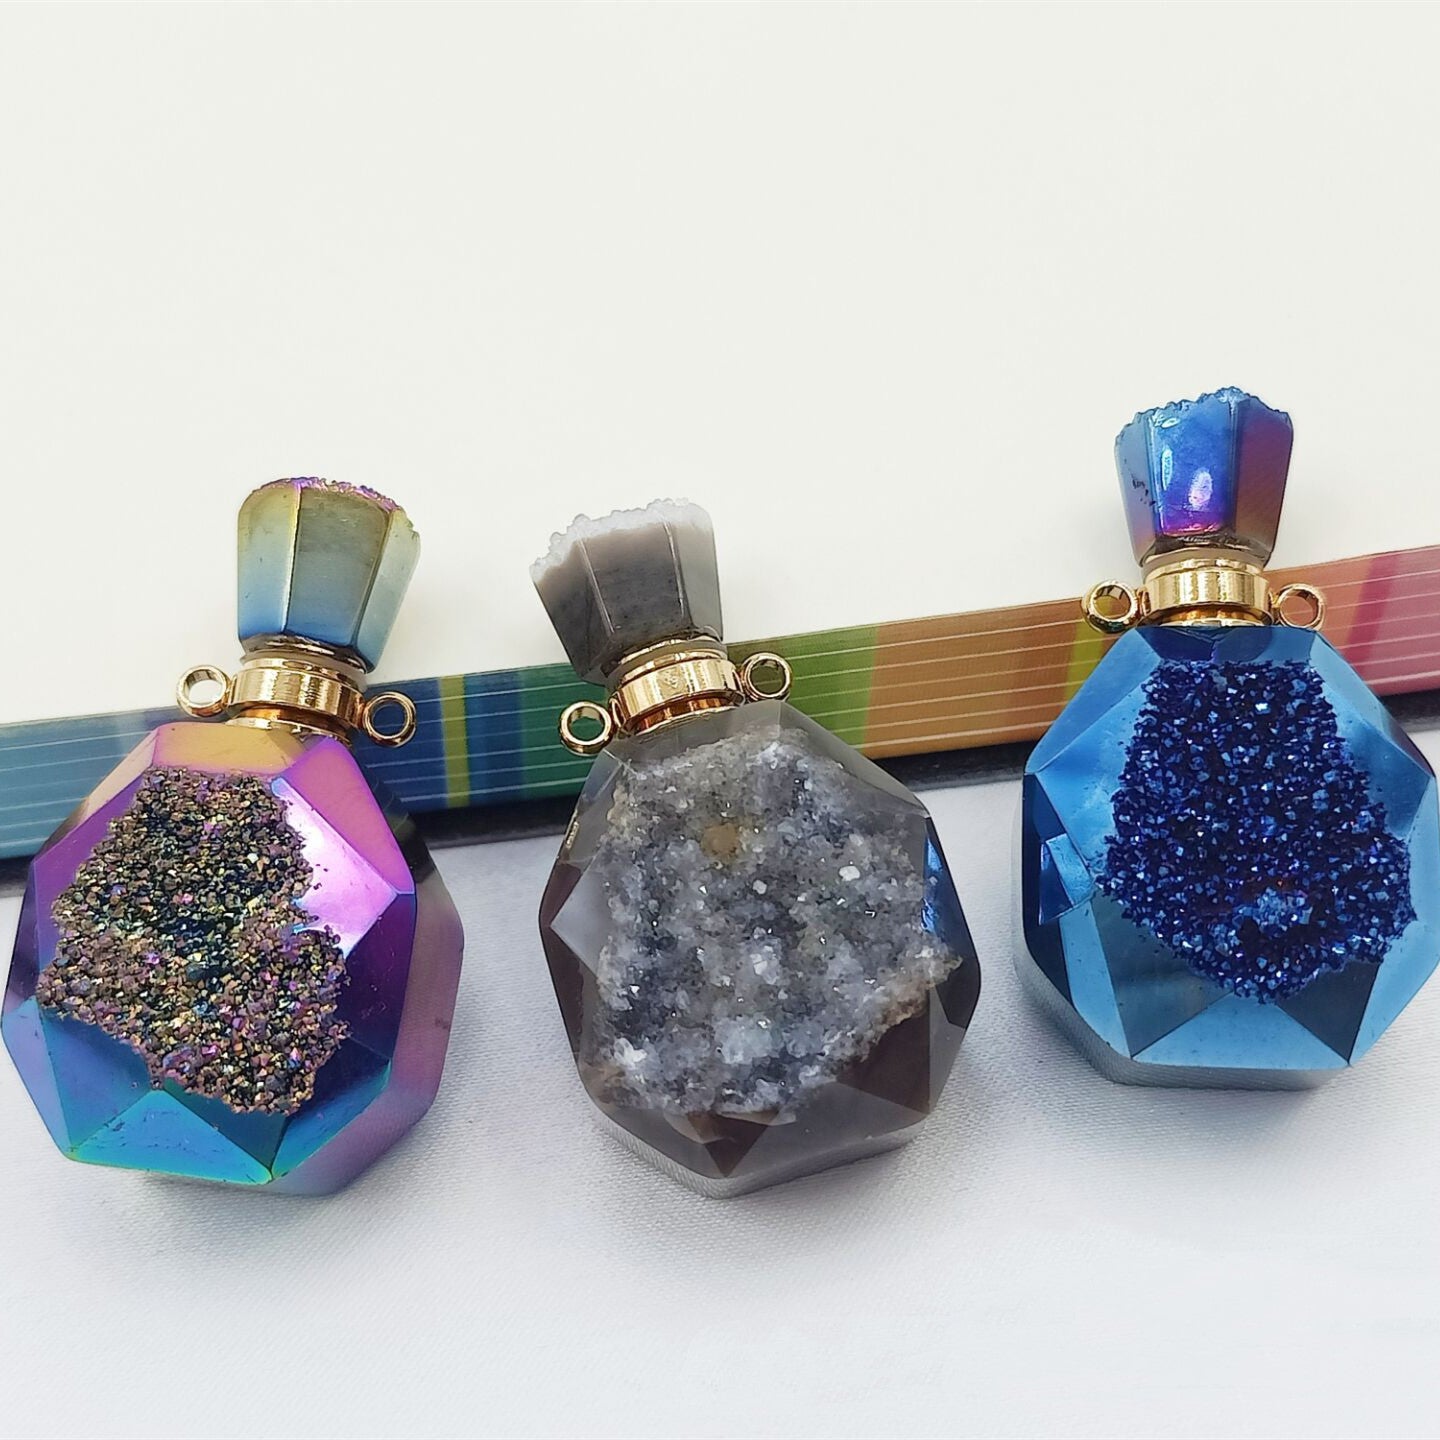 A set of three Agate Crystal Pendant perfume bottles on a table, by Maramalive™.